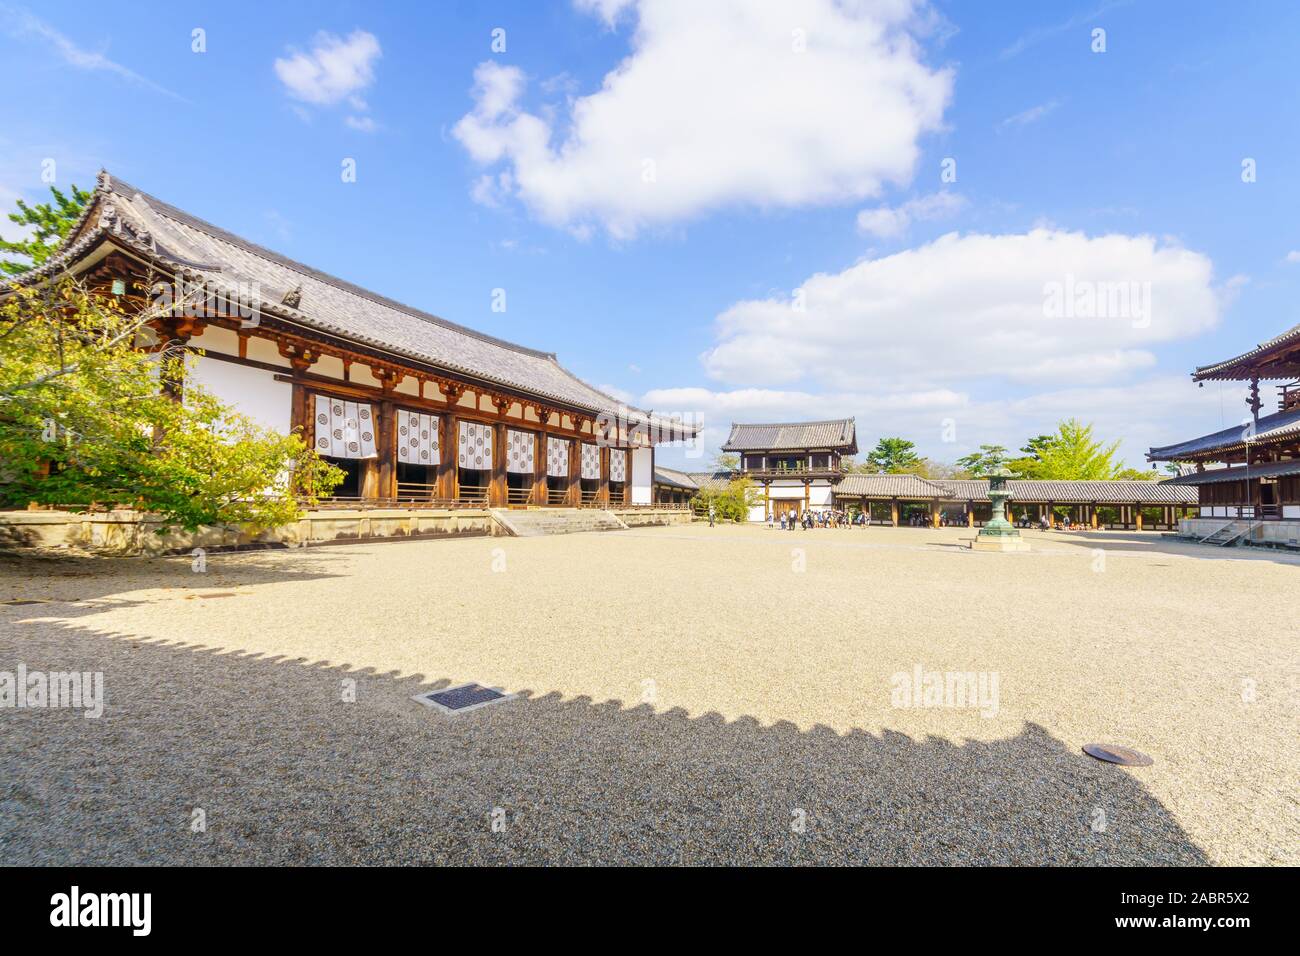 Ikaruga, Japan - October 5, 2019: View of the Horyu-ji compound, with visitors, it is a Buddhist temple in Ikaruga, Nara prefecture, Japan Stock Photo